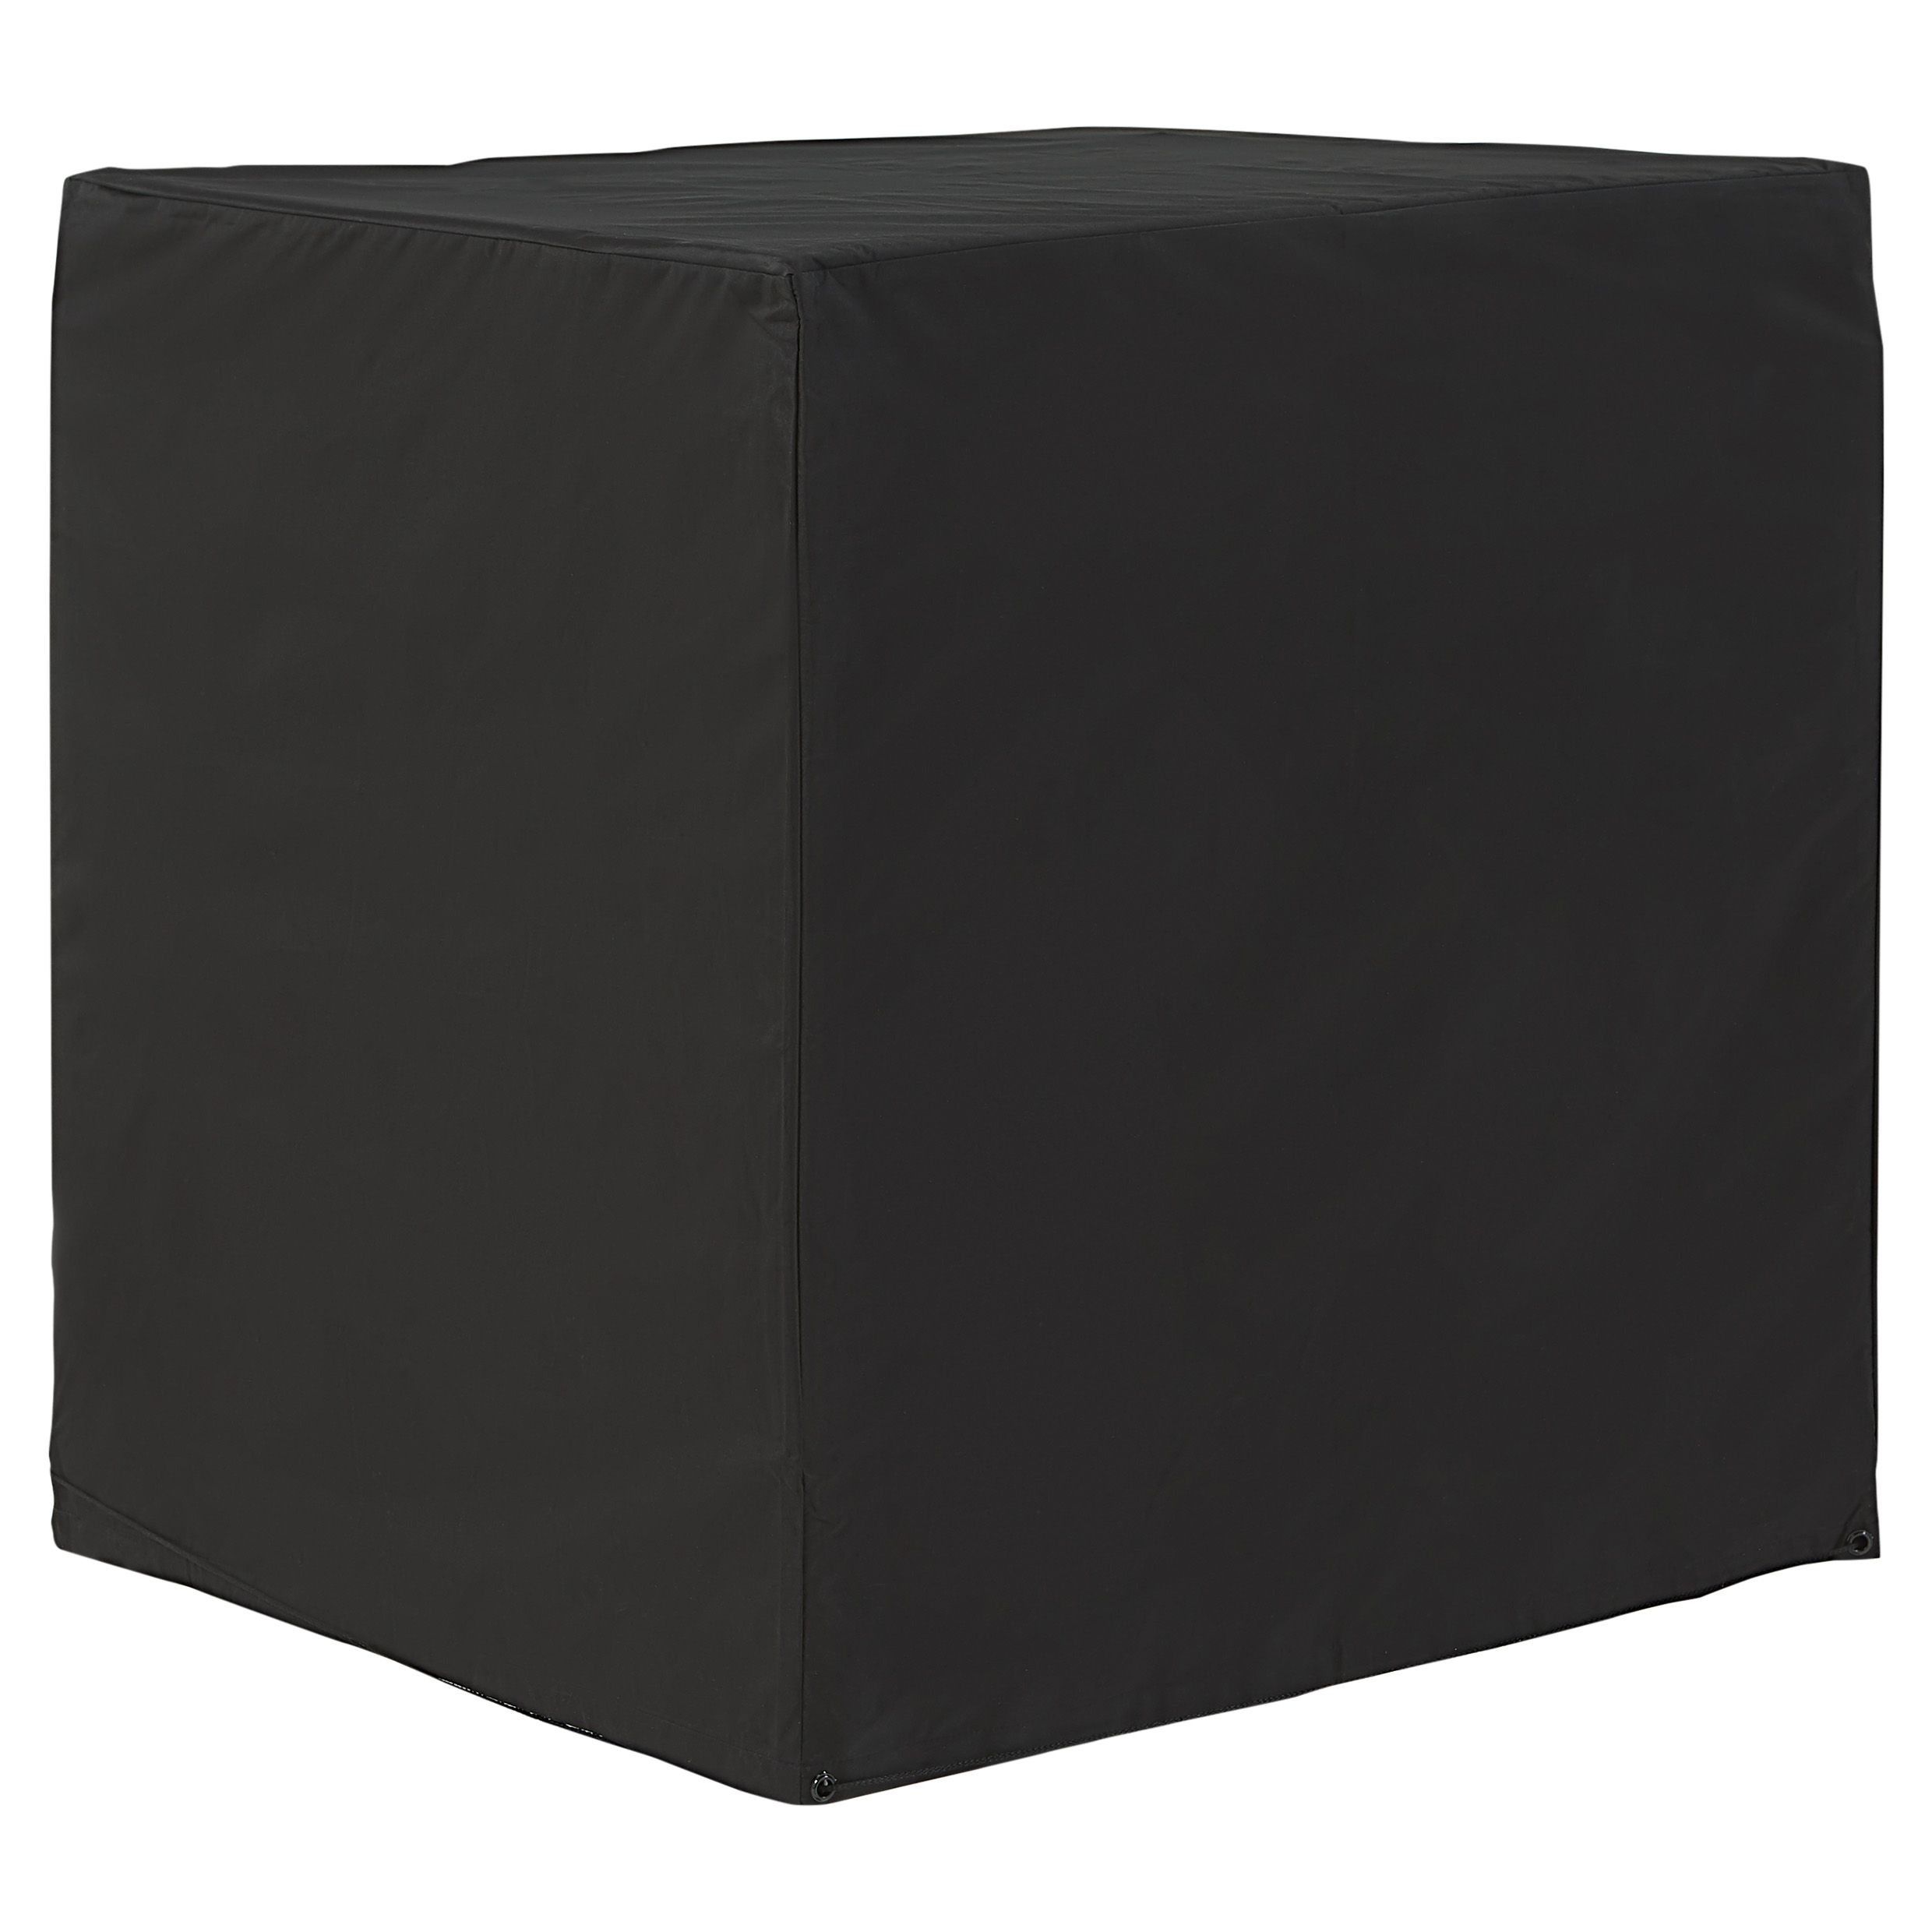 Blooma Russel Black Polyester (PES) Rectangular Barbecue cover 82cm(L) 72cm(W)